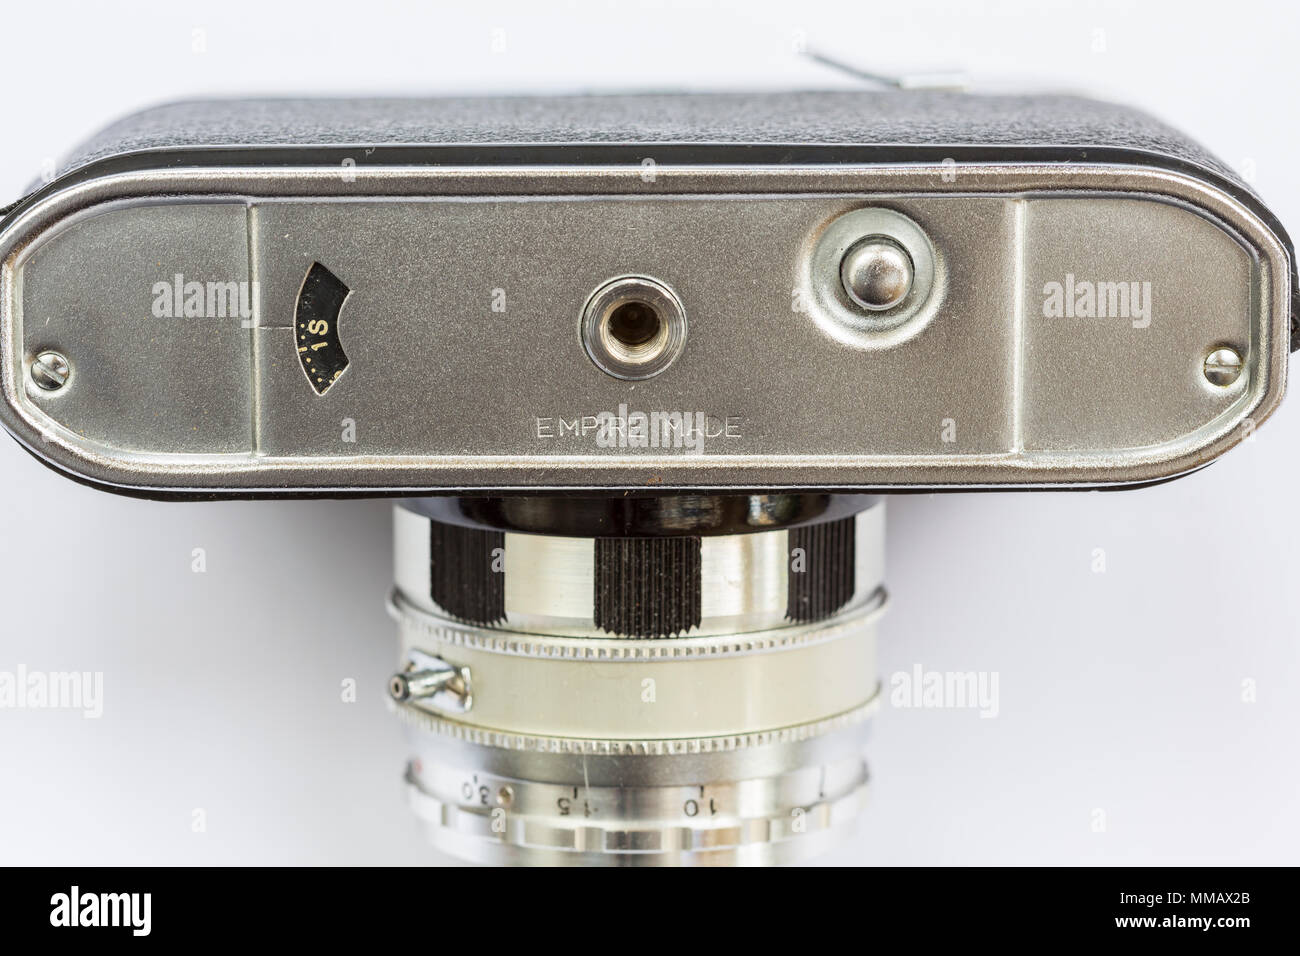 Made in the British Empire. A Halina camera made in the mid 1960's in Hong Kong. Stock Photo